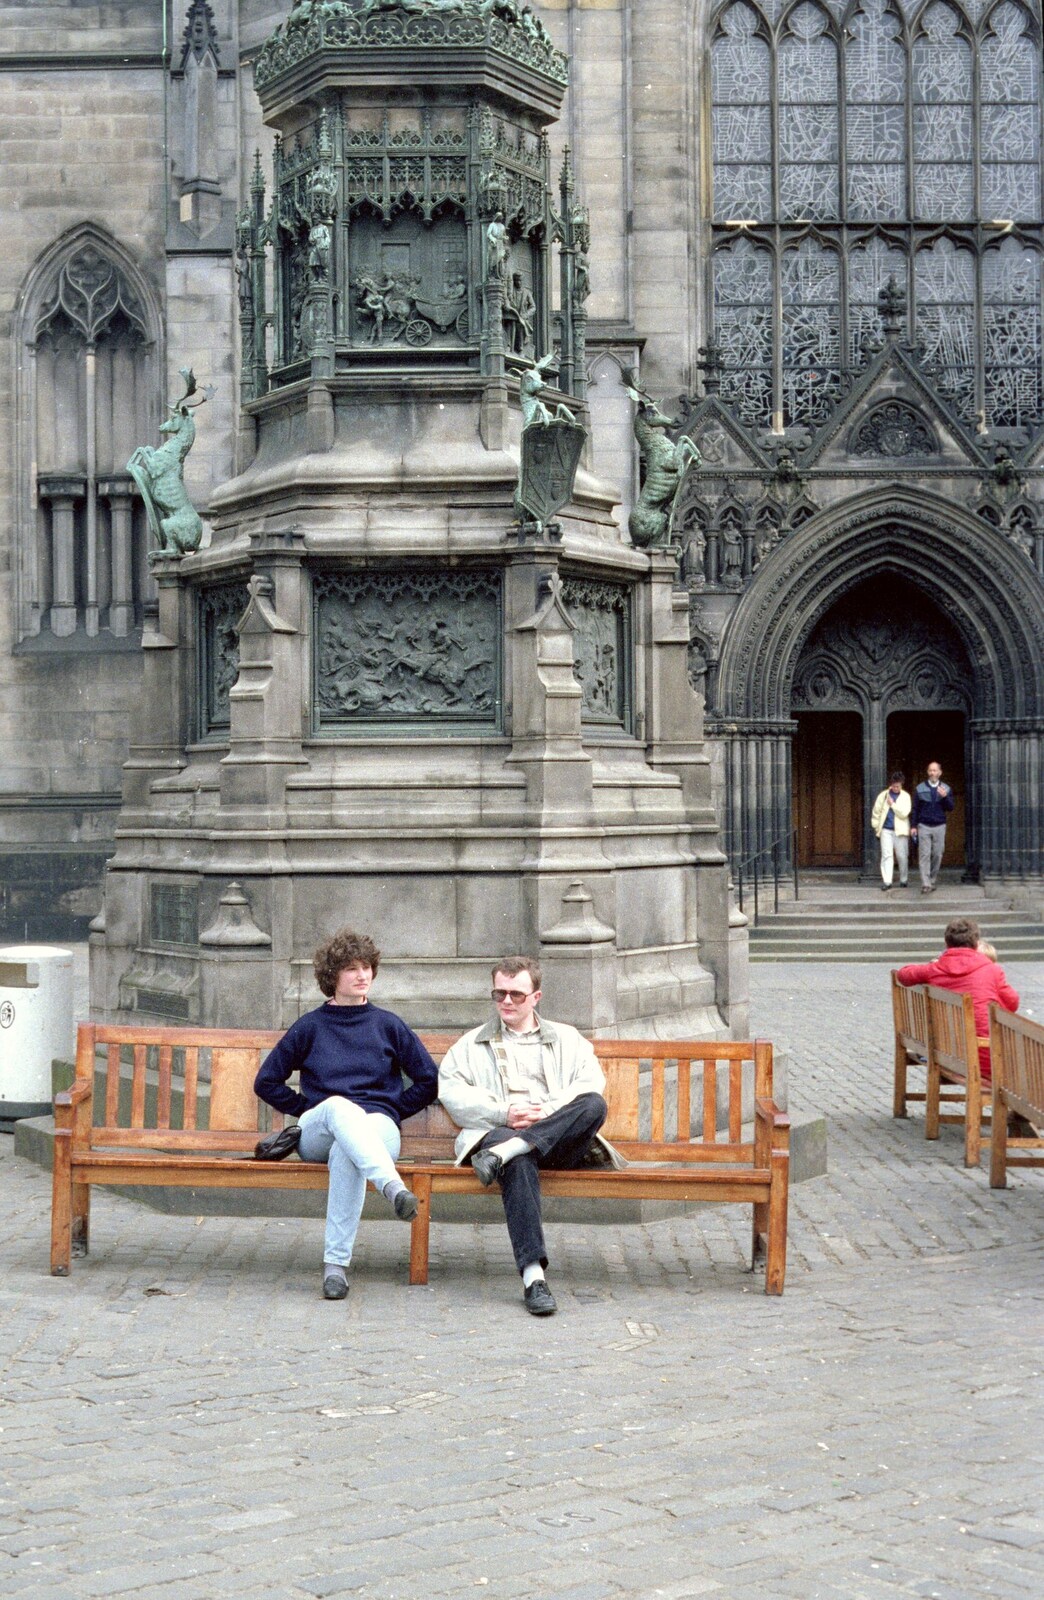 Uni: A Trip To Glasgow and Edinburgh, Scotland - 15th May 1989: Angela and Hamish sit on a bench